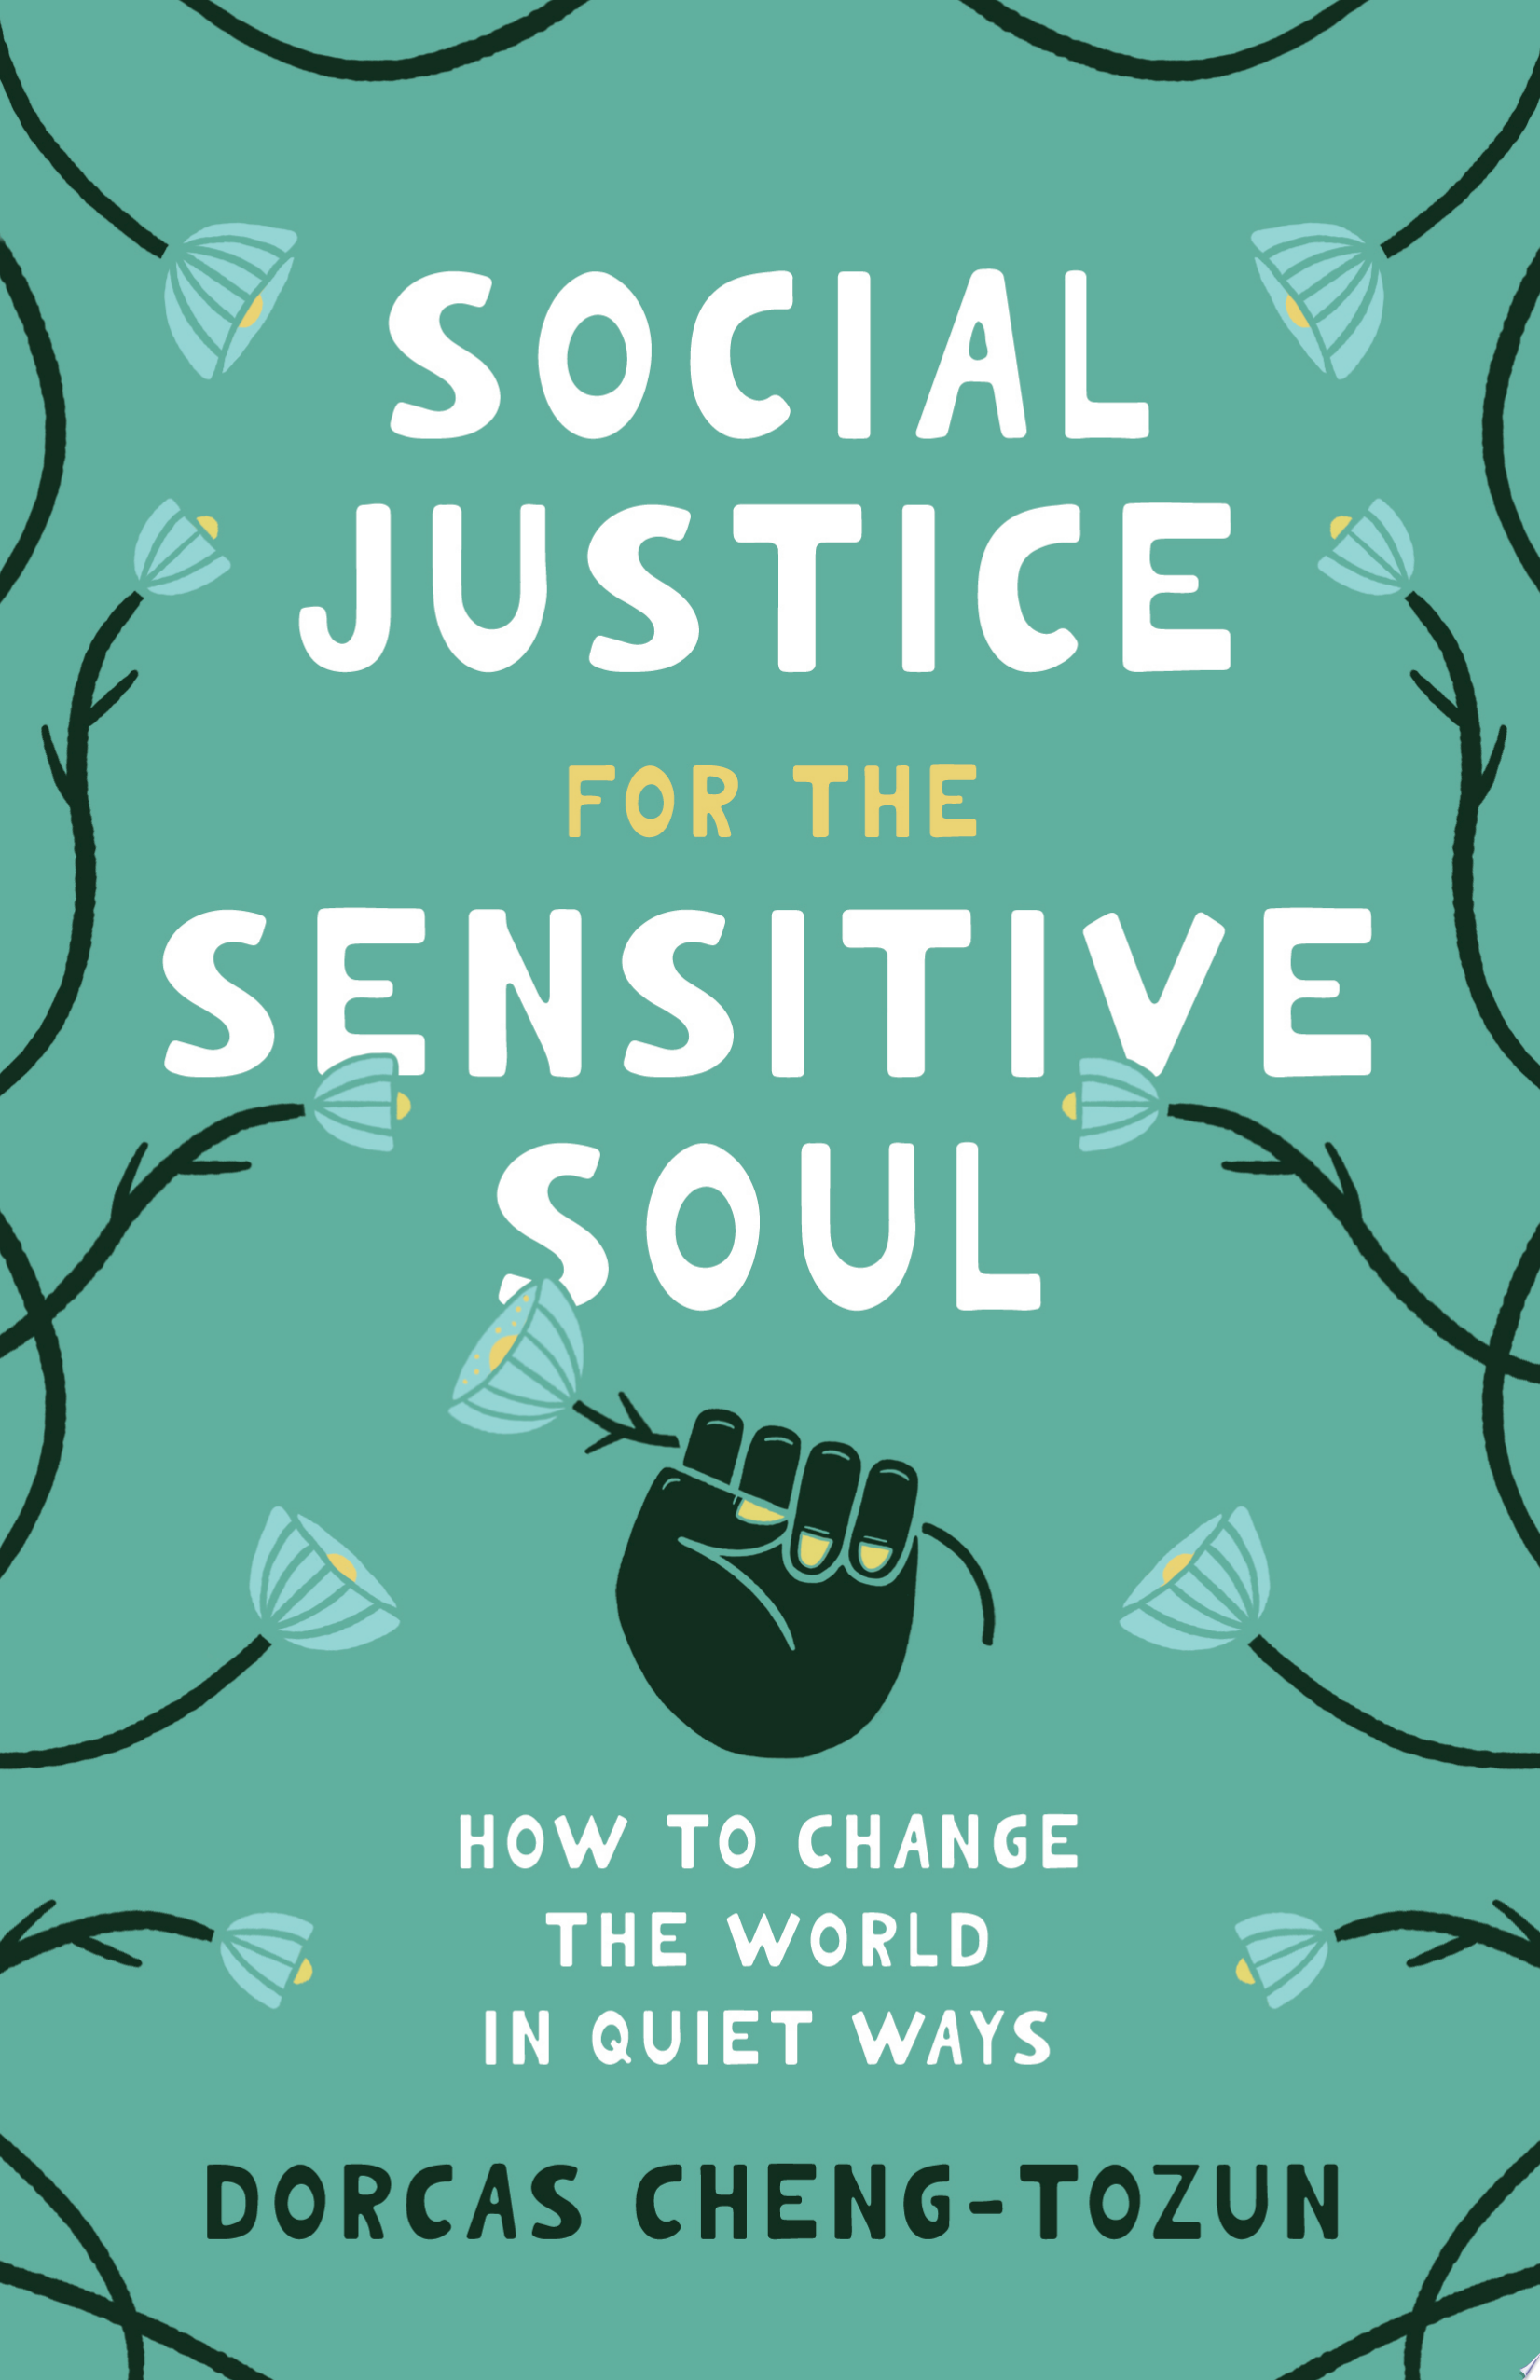 Image for "Social Justice for the Sensitive Soul"